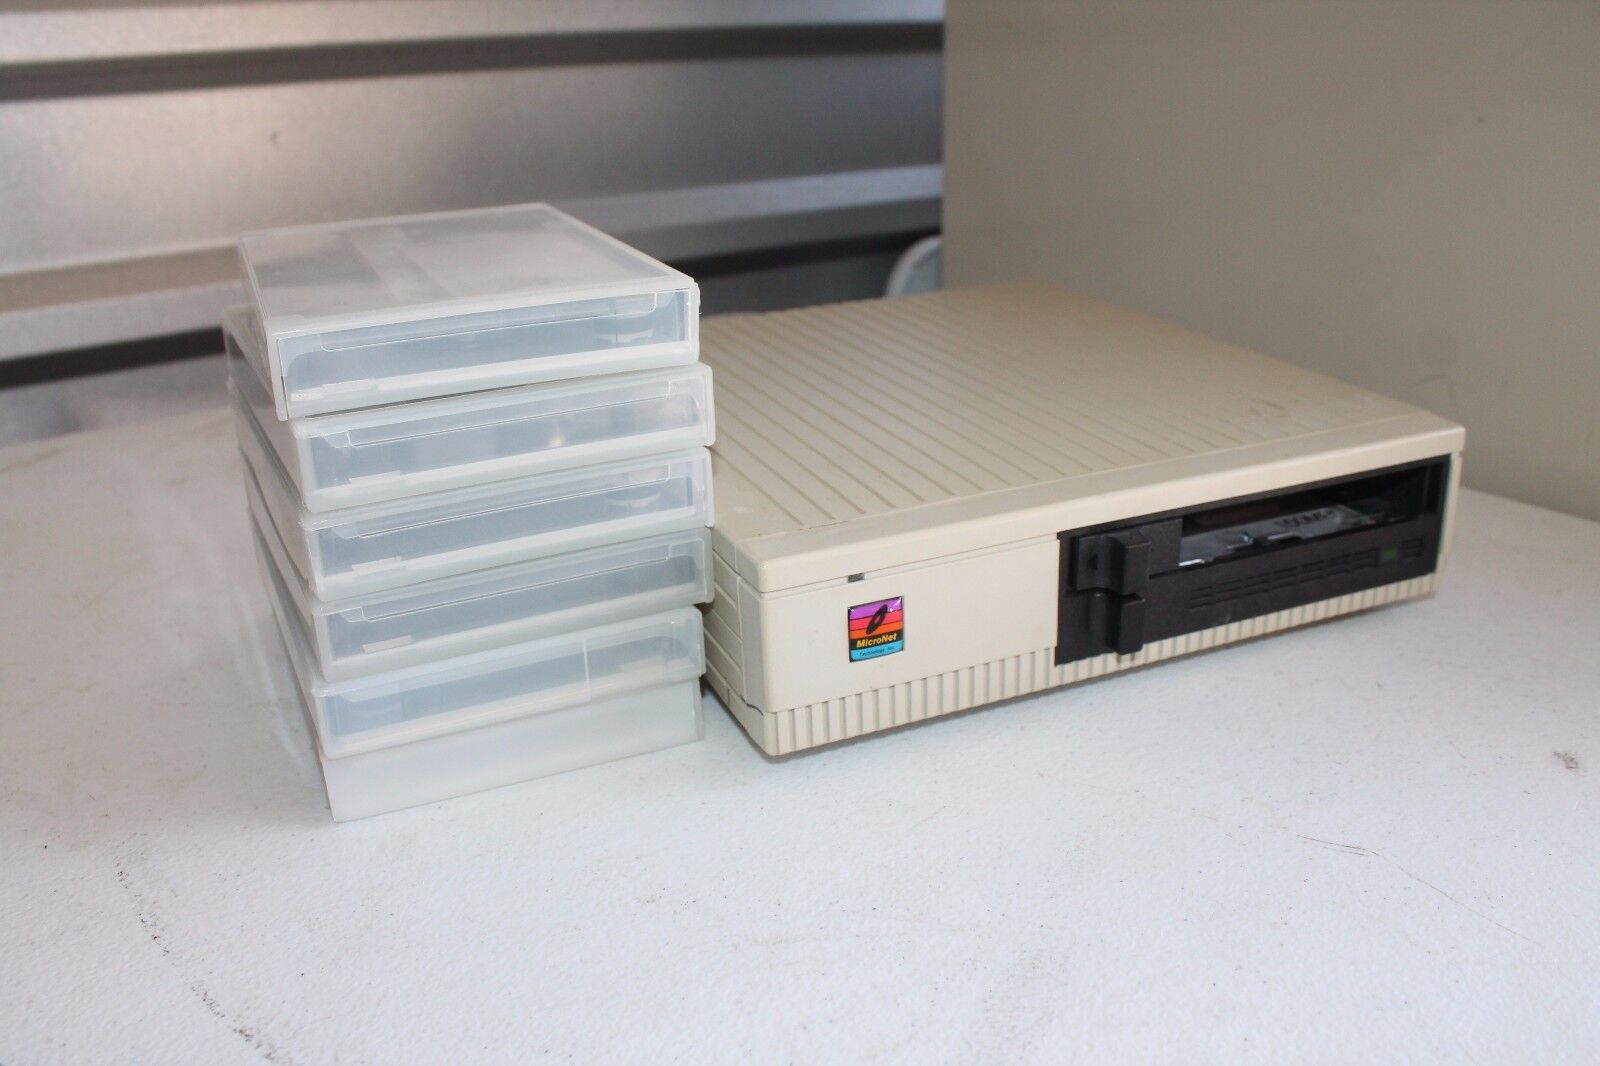 Micronet Technology Model MR-90C 5.25 Cutting Edge Drive With 6 Tape Drives